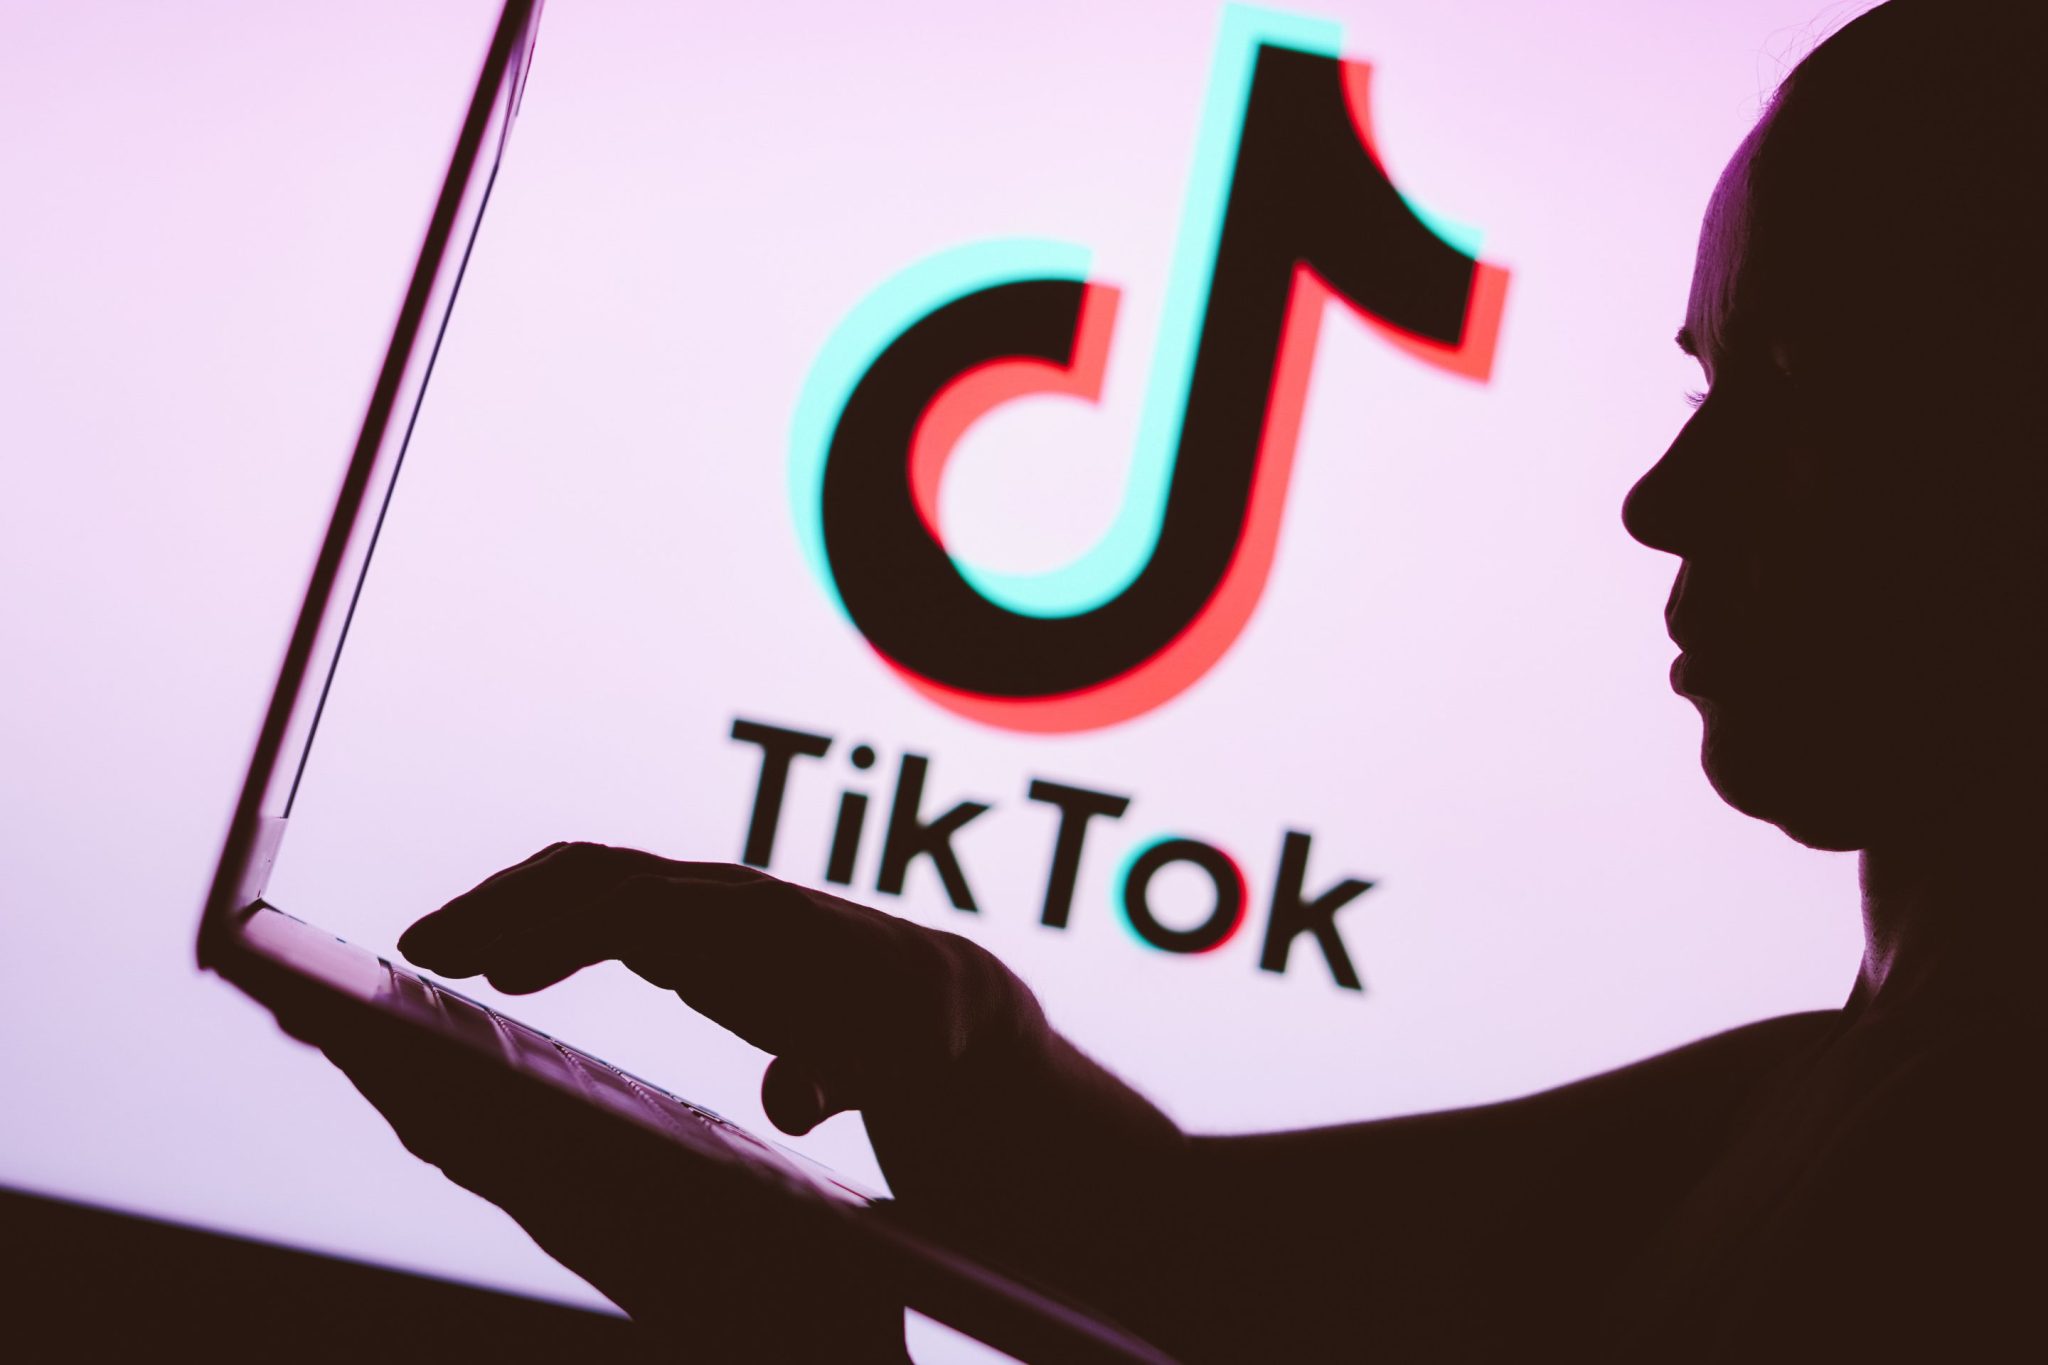 Iowa suing TikTok, claiming it deceives consumers about the amount of ‘inappropriate content’ children can access